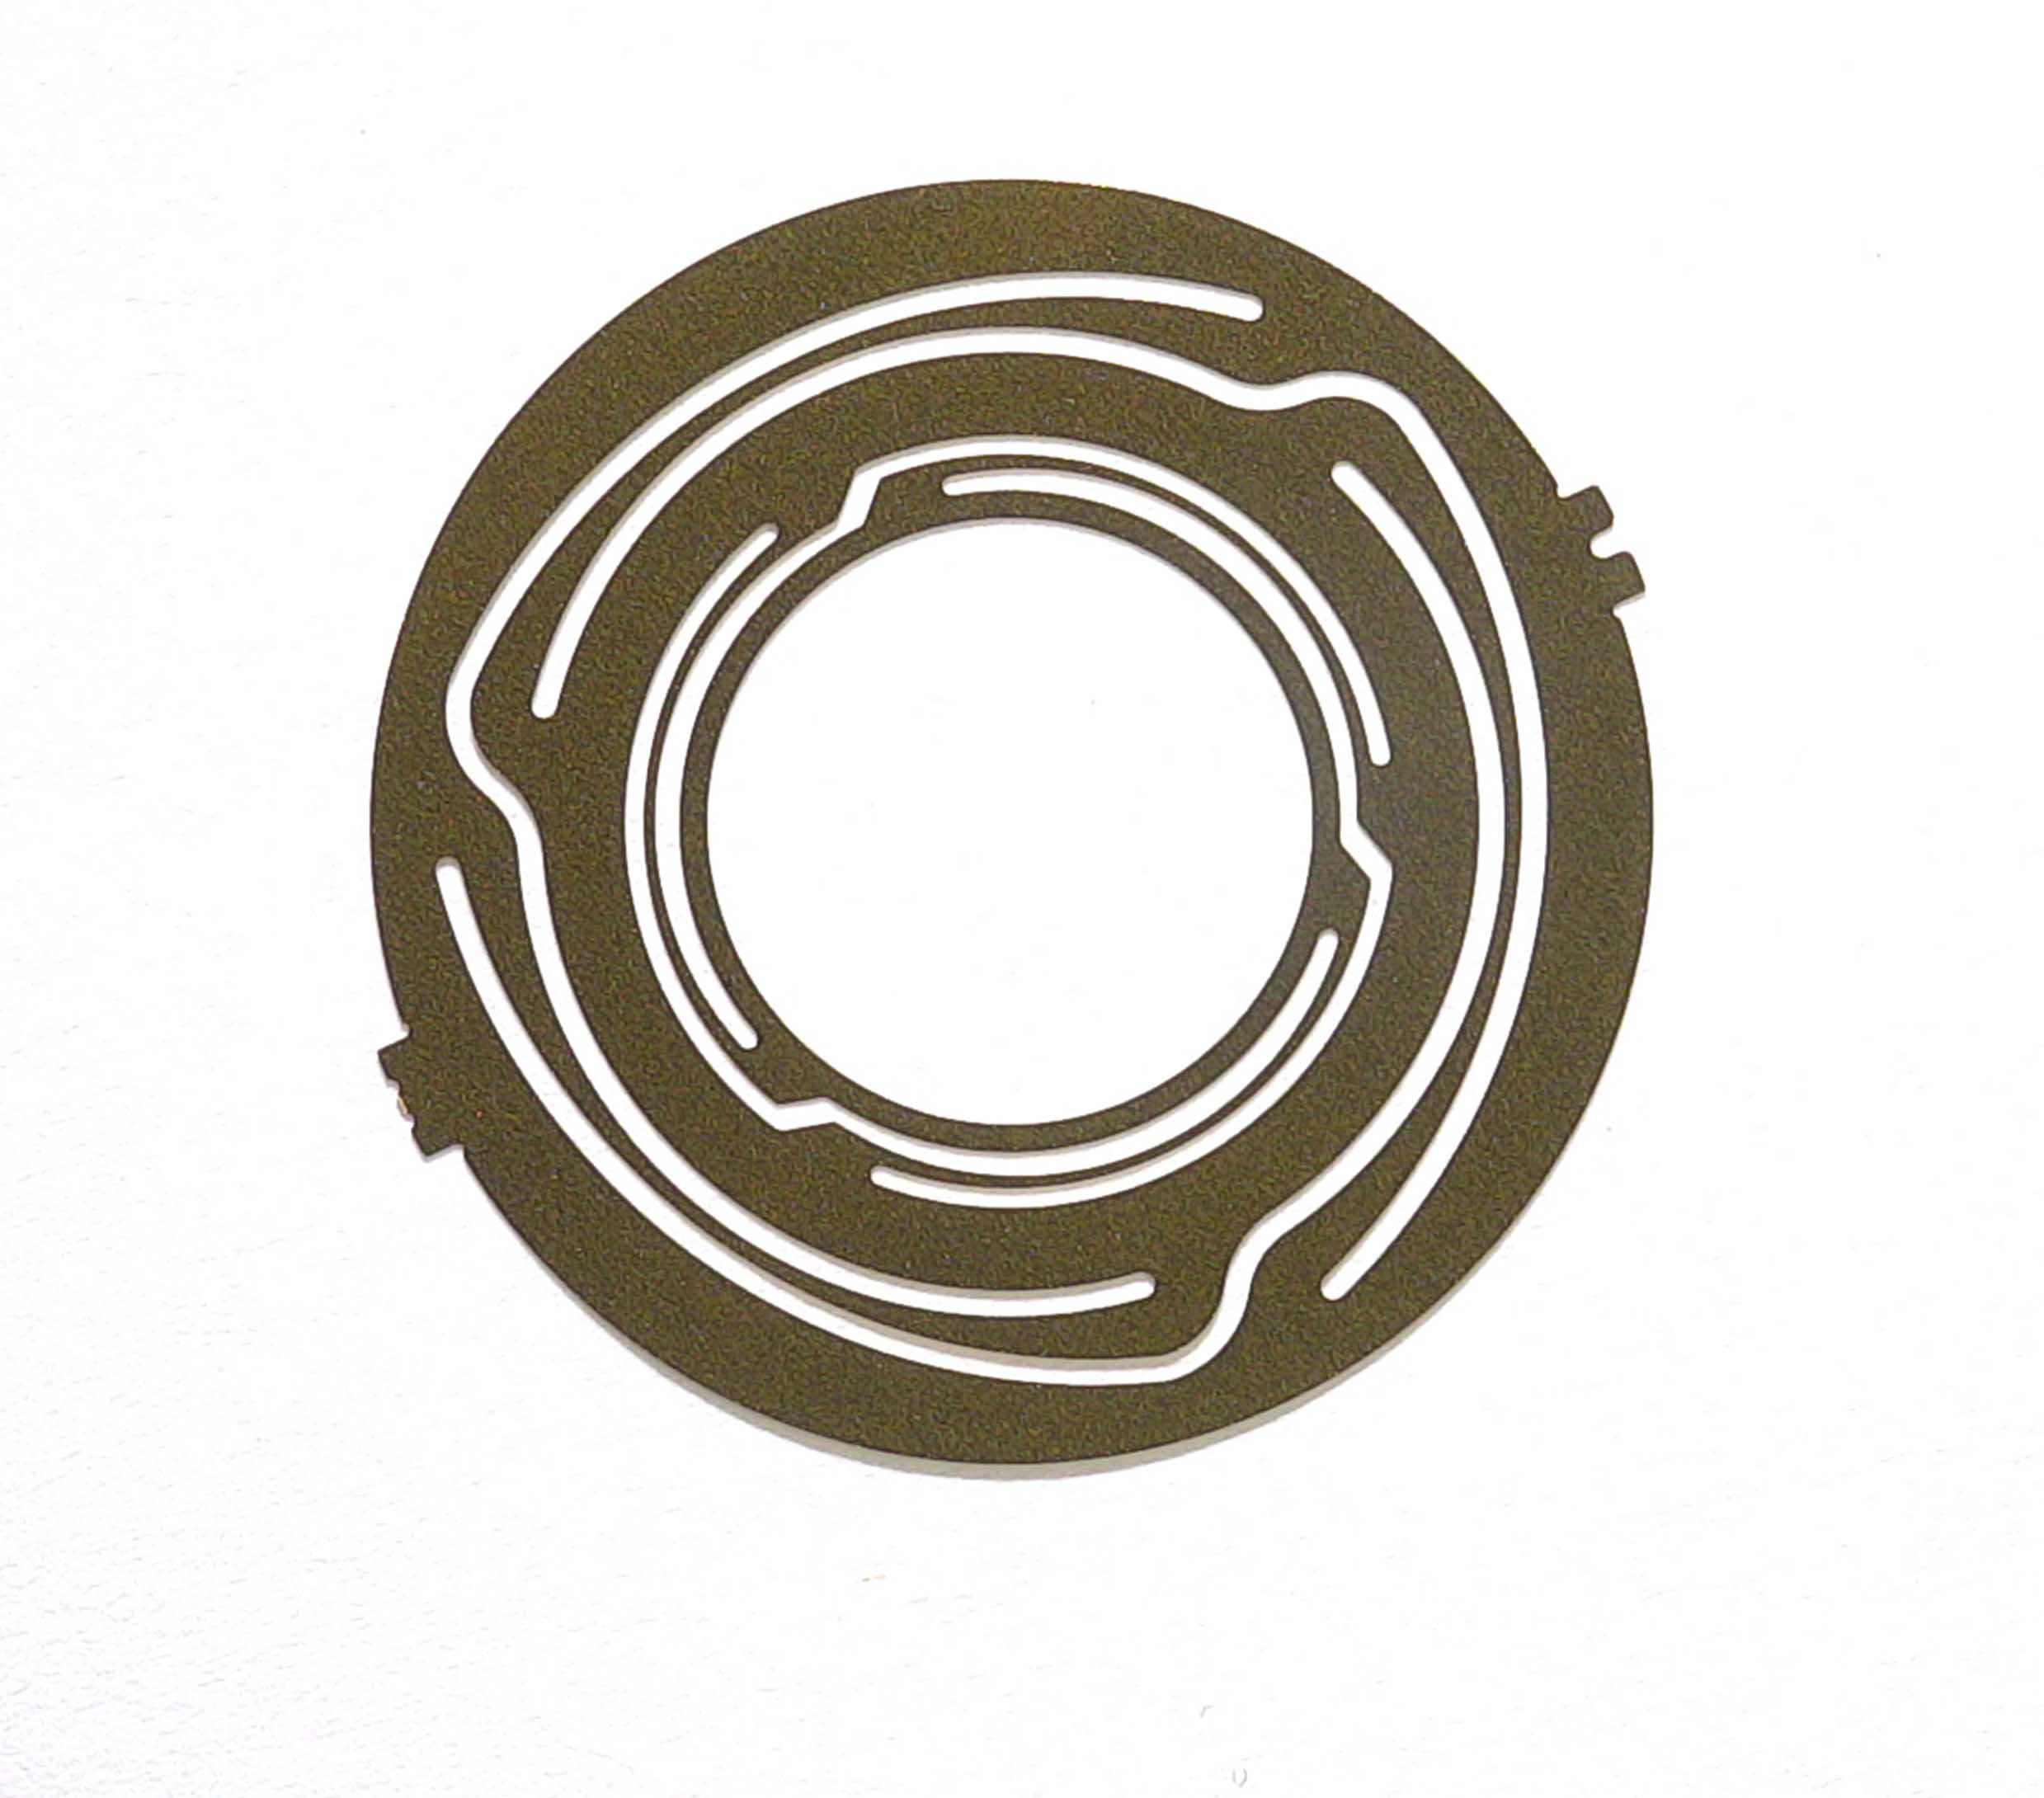 Product Complex Washers & Rings through Photo Etching - micrometal image